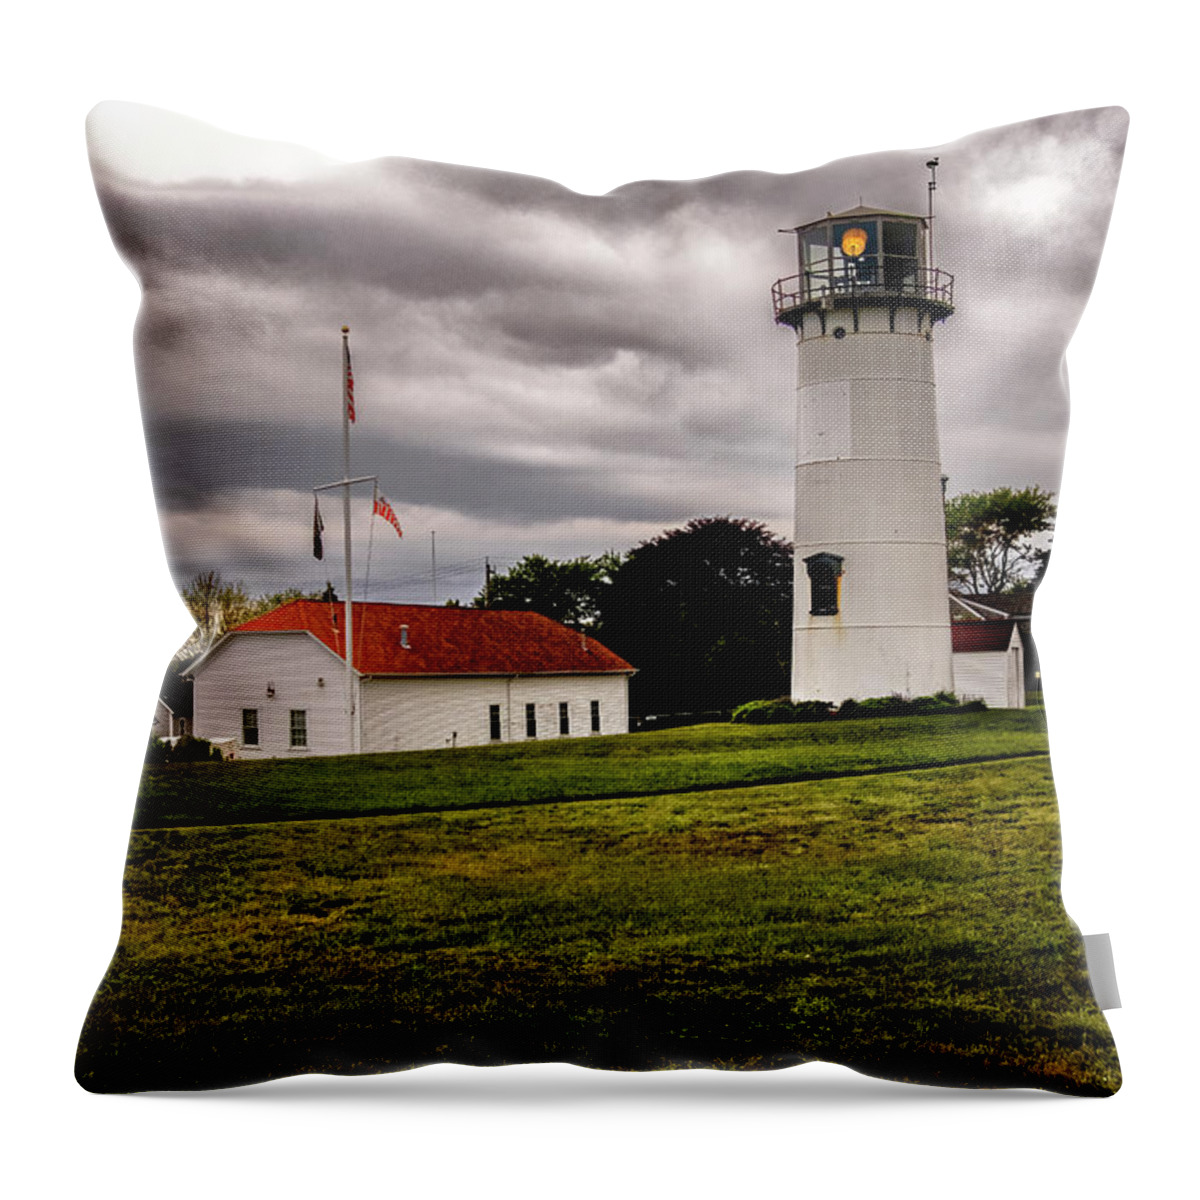 Orange Massachusetts Throw Pillow featuring the photograph Chatham Coast Guard Station by Tom Singleton